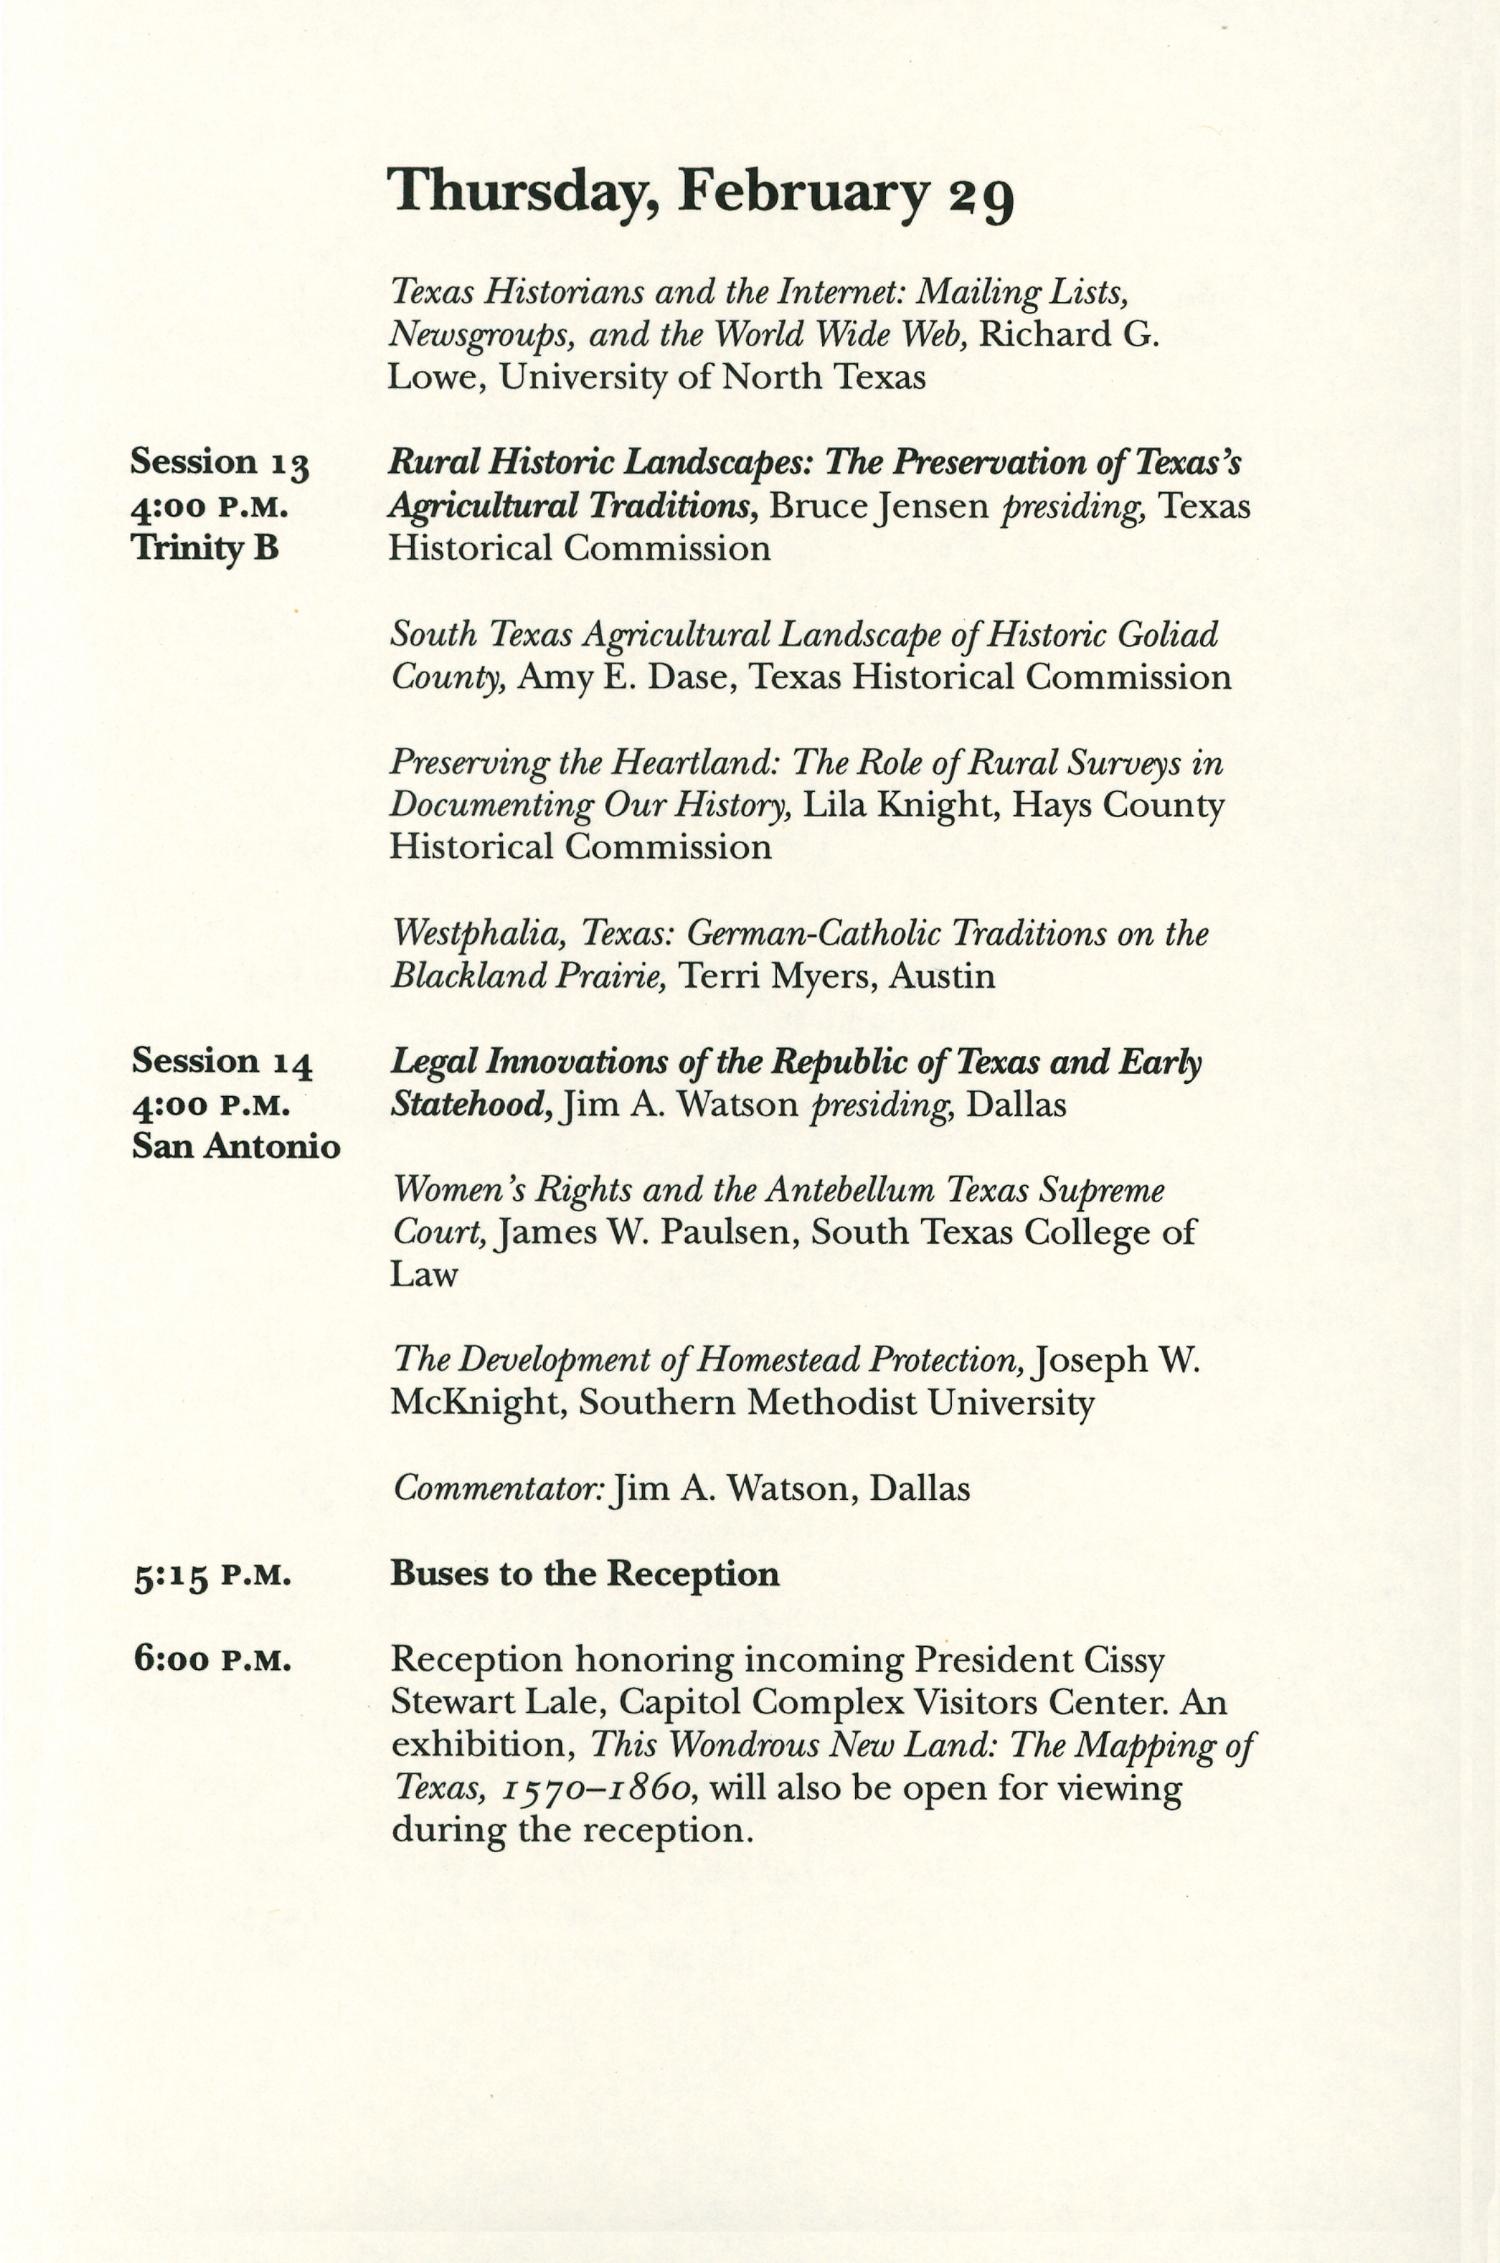 Texas State Historical Association One Hundredth Annual Meeting, 1996
                                                
                                                    11
                                                